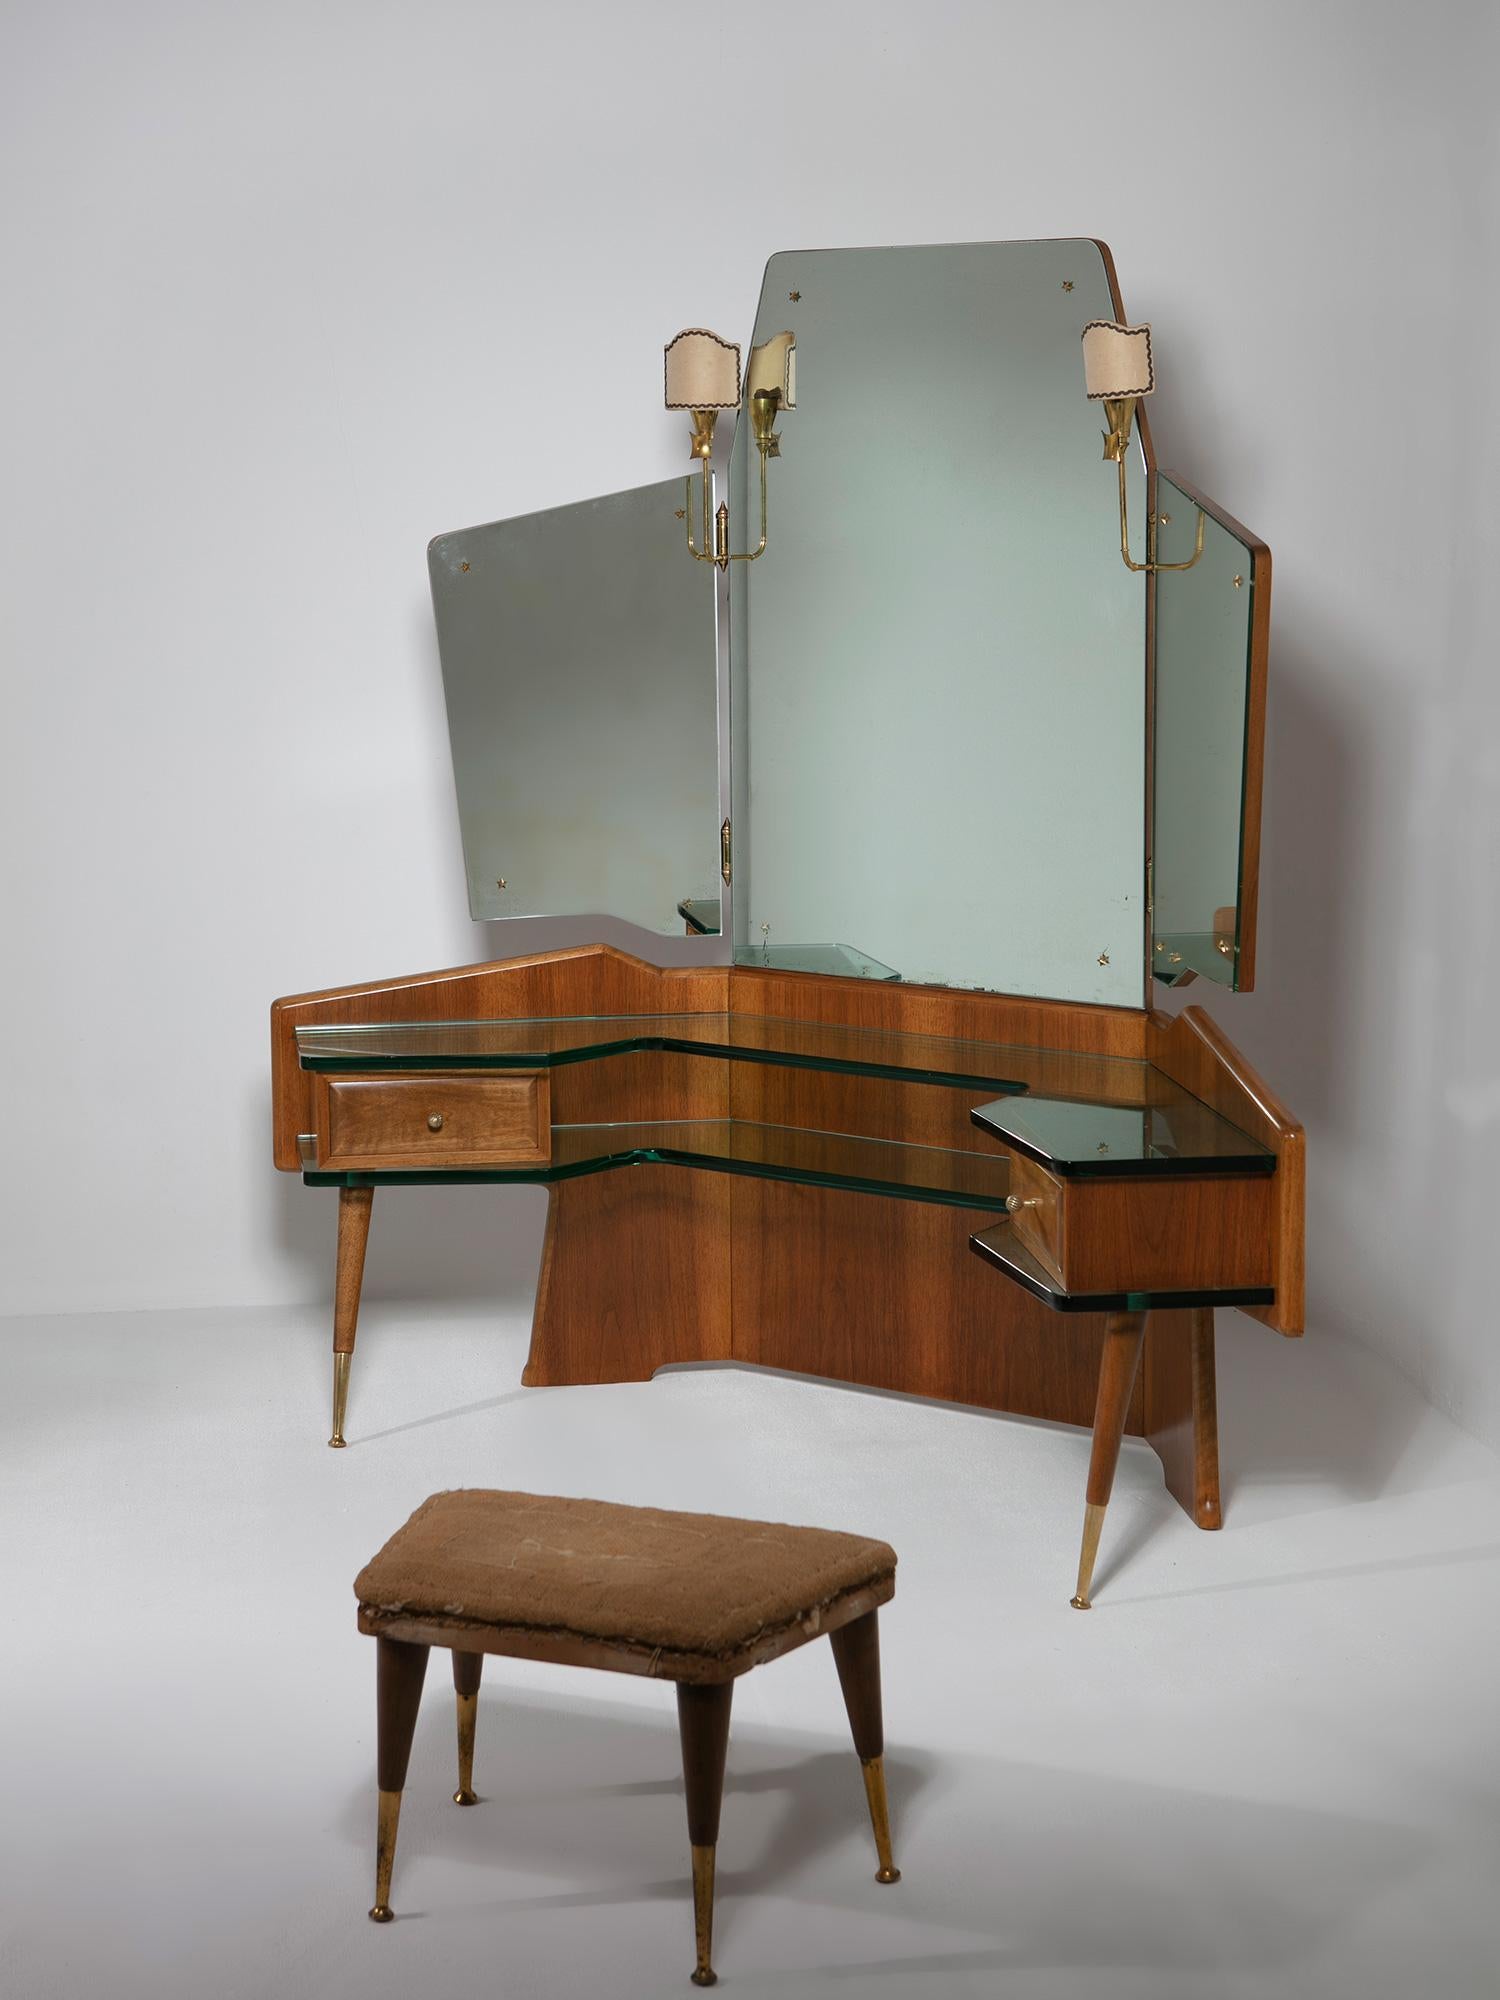 Italian 50s corner vanity attributed to Pietro Chiesa.
Central large mirror and two adjustable side mirrors with brass lamps.
Large green Nile glass tops incorporate drawers, legs and back frame.
Matching stool with brass details.